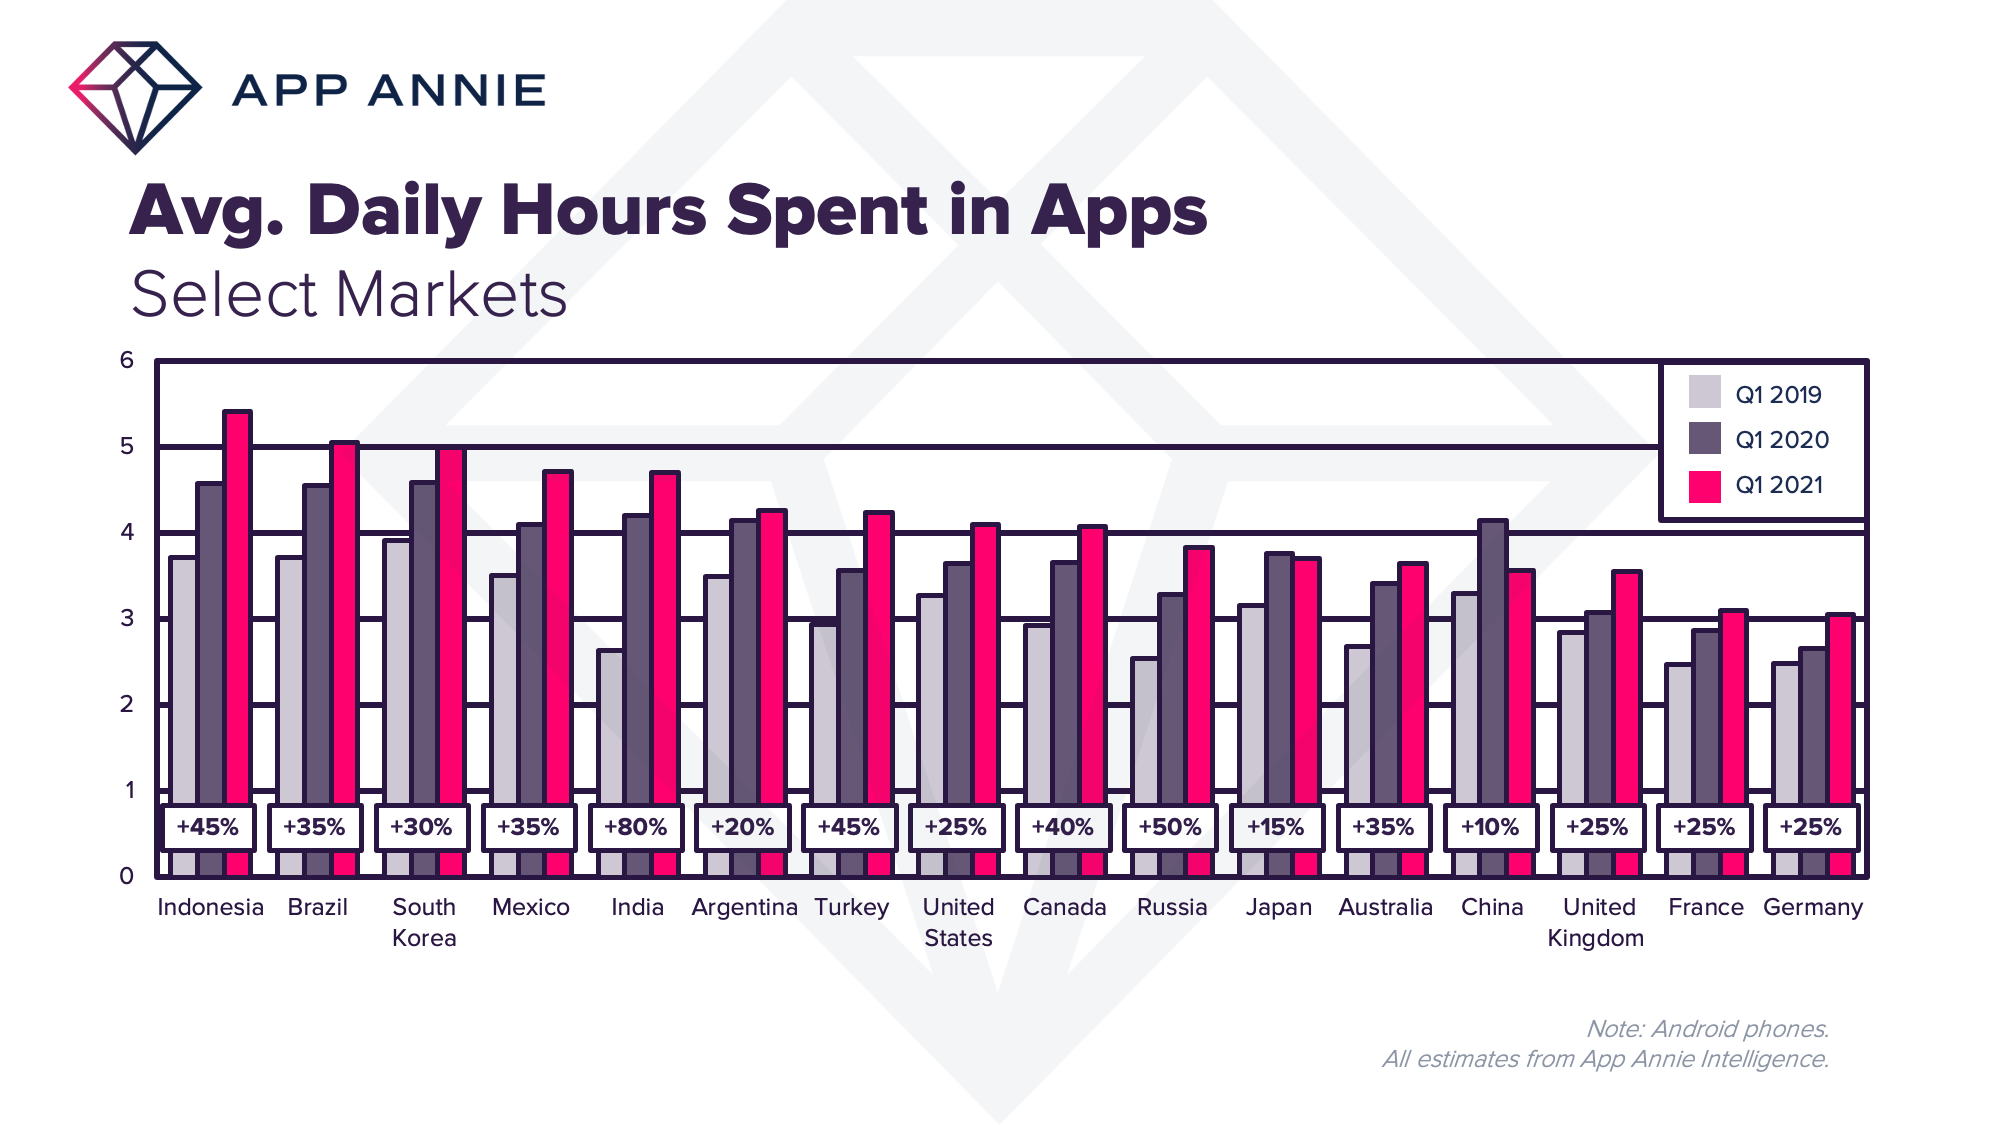 Mobile app usage is over 5 hours per day in some regions | TechSpot